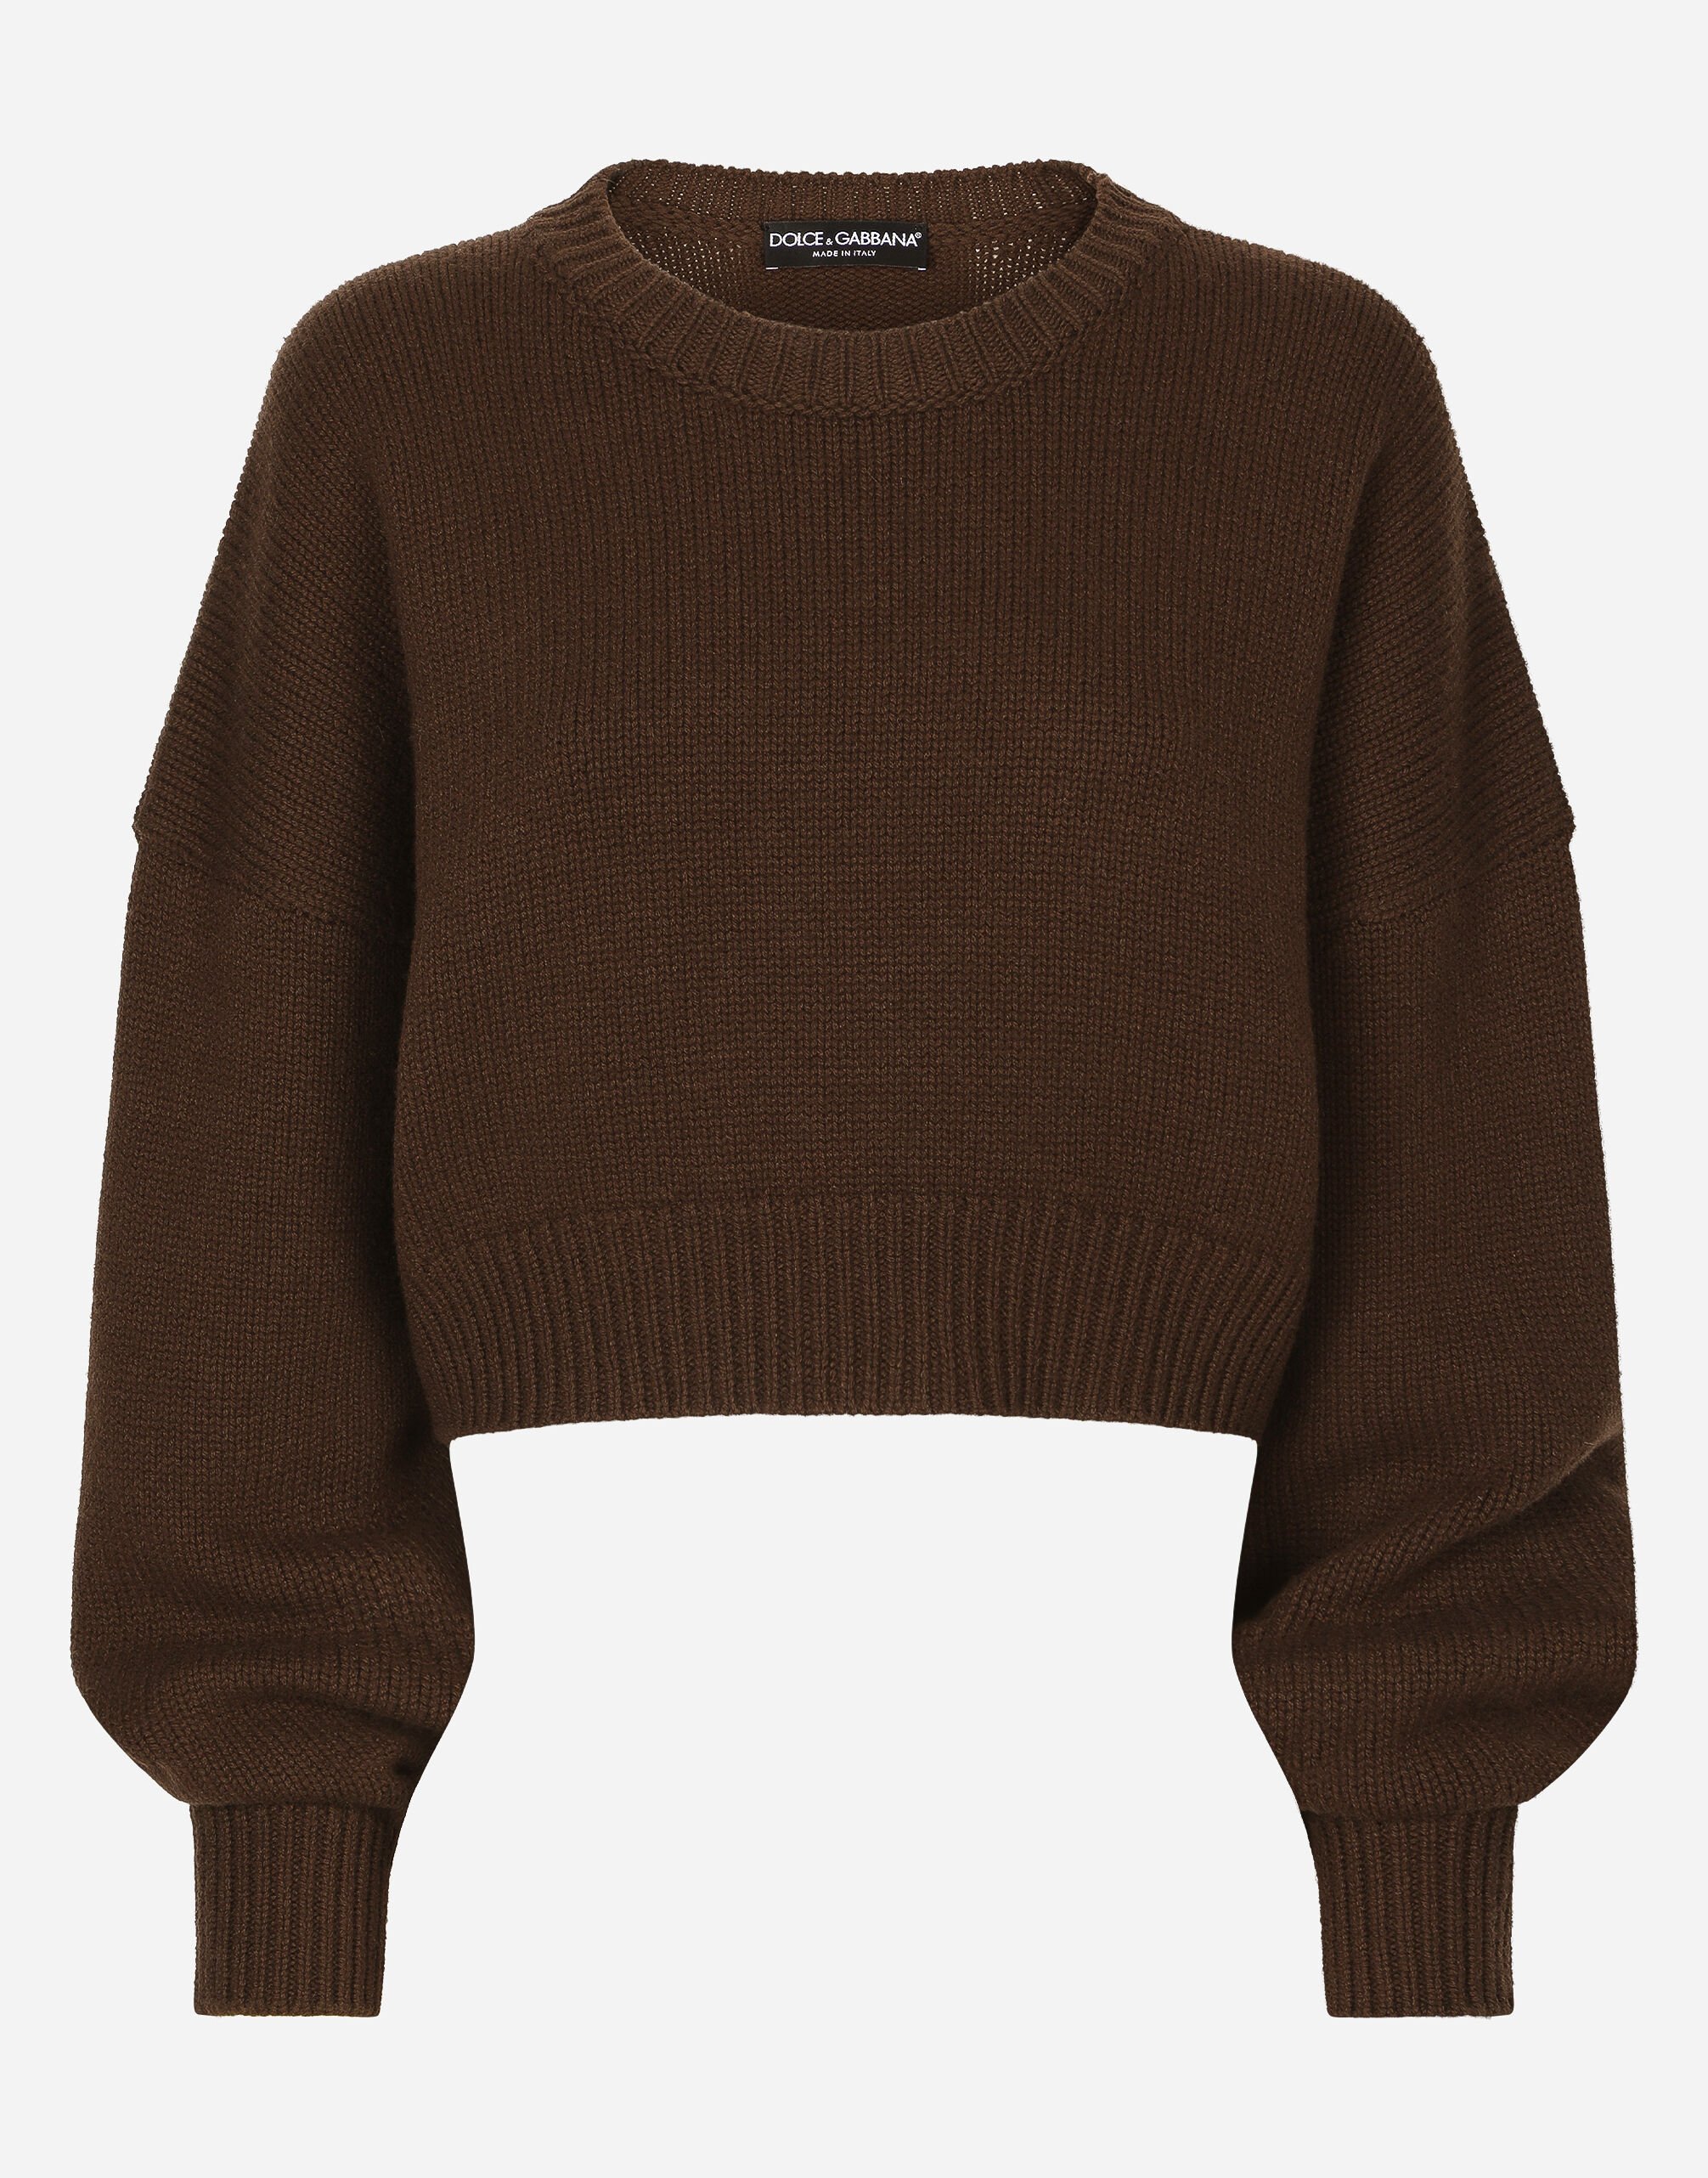 Dolce & Gabbana Wool and cashmere round-neck sweater Multicolor FXM38TJCVP3